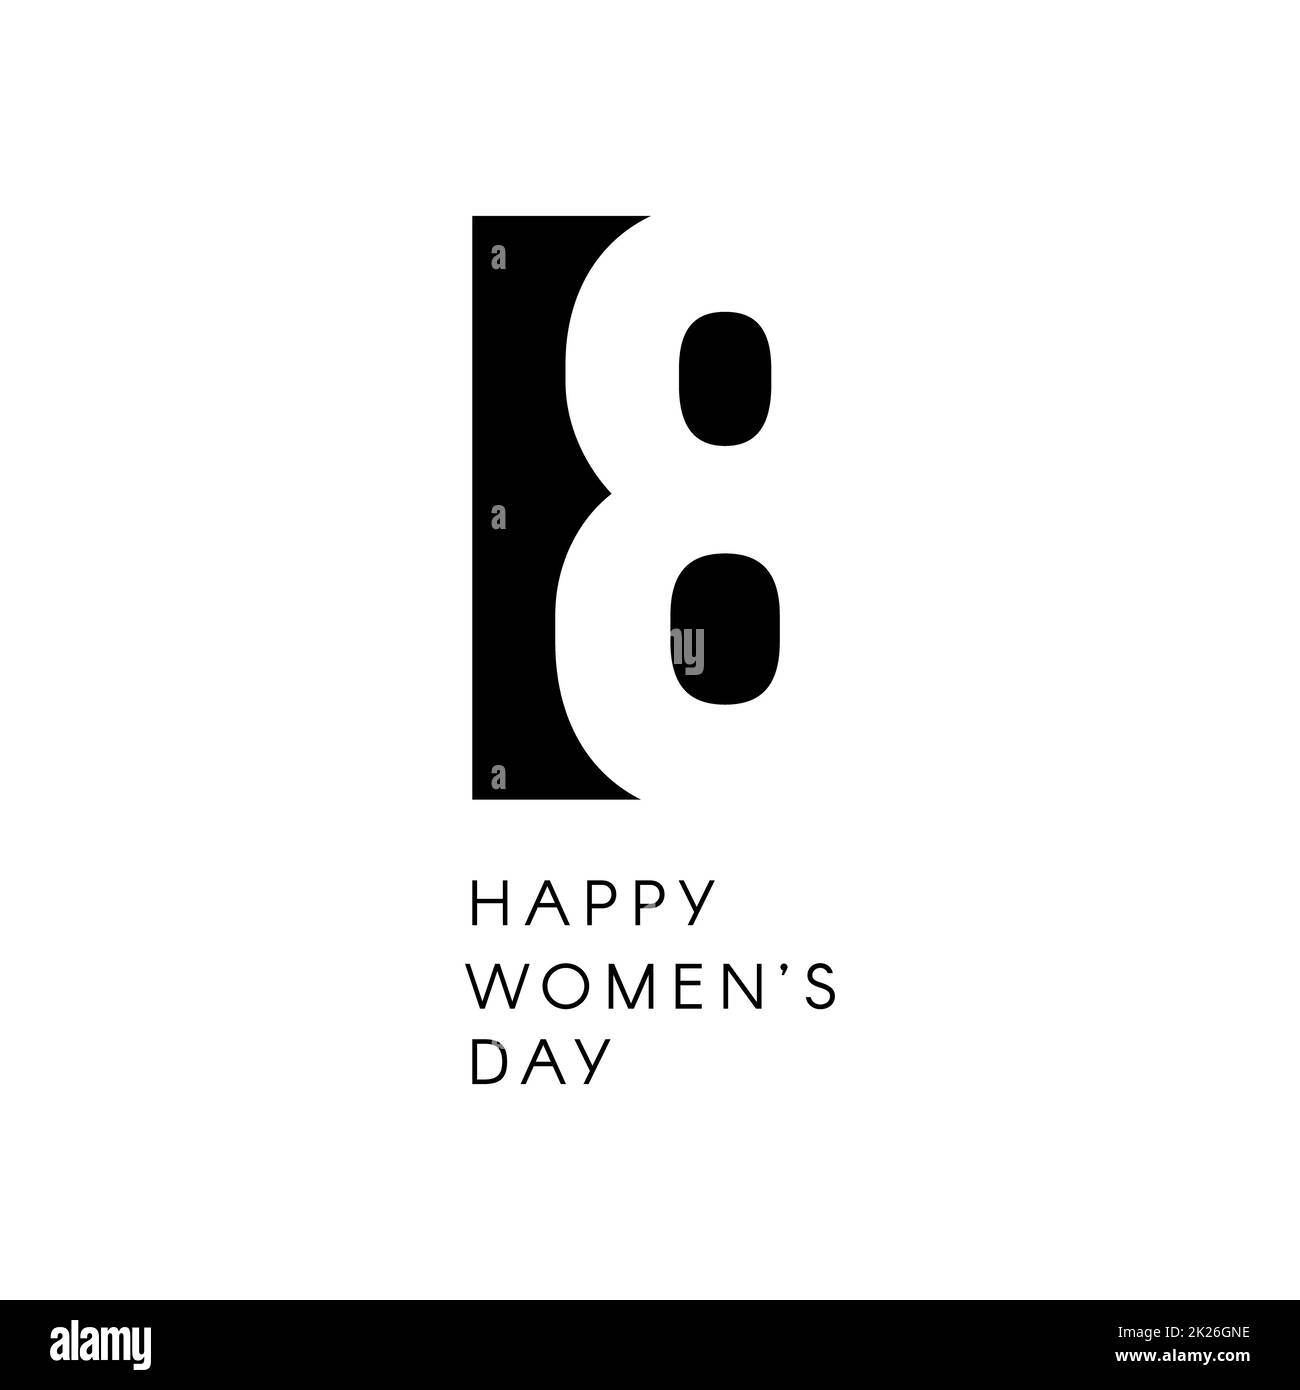 Happy womens day sign. Black negative space vector logo. Stock Photo